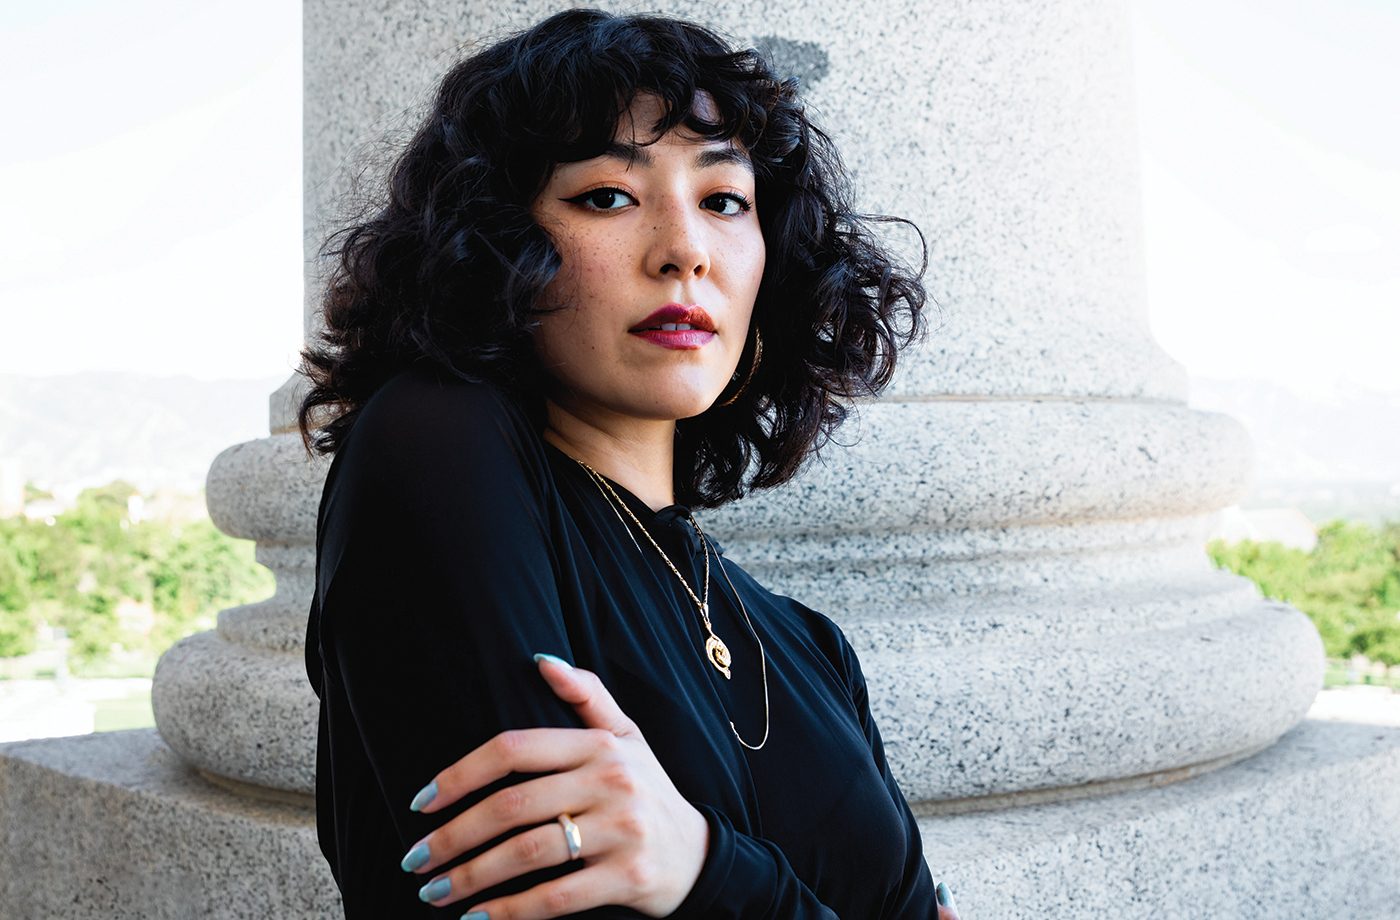 As a Japanese-Venezuelan solo singer and producer, Marqueza strives to represent intersectionality through their music.